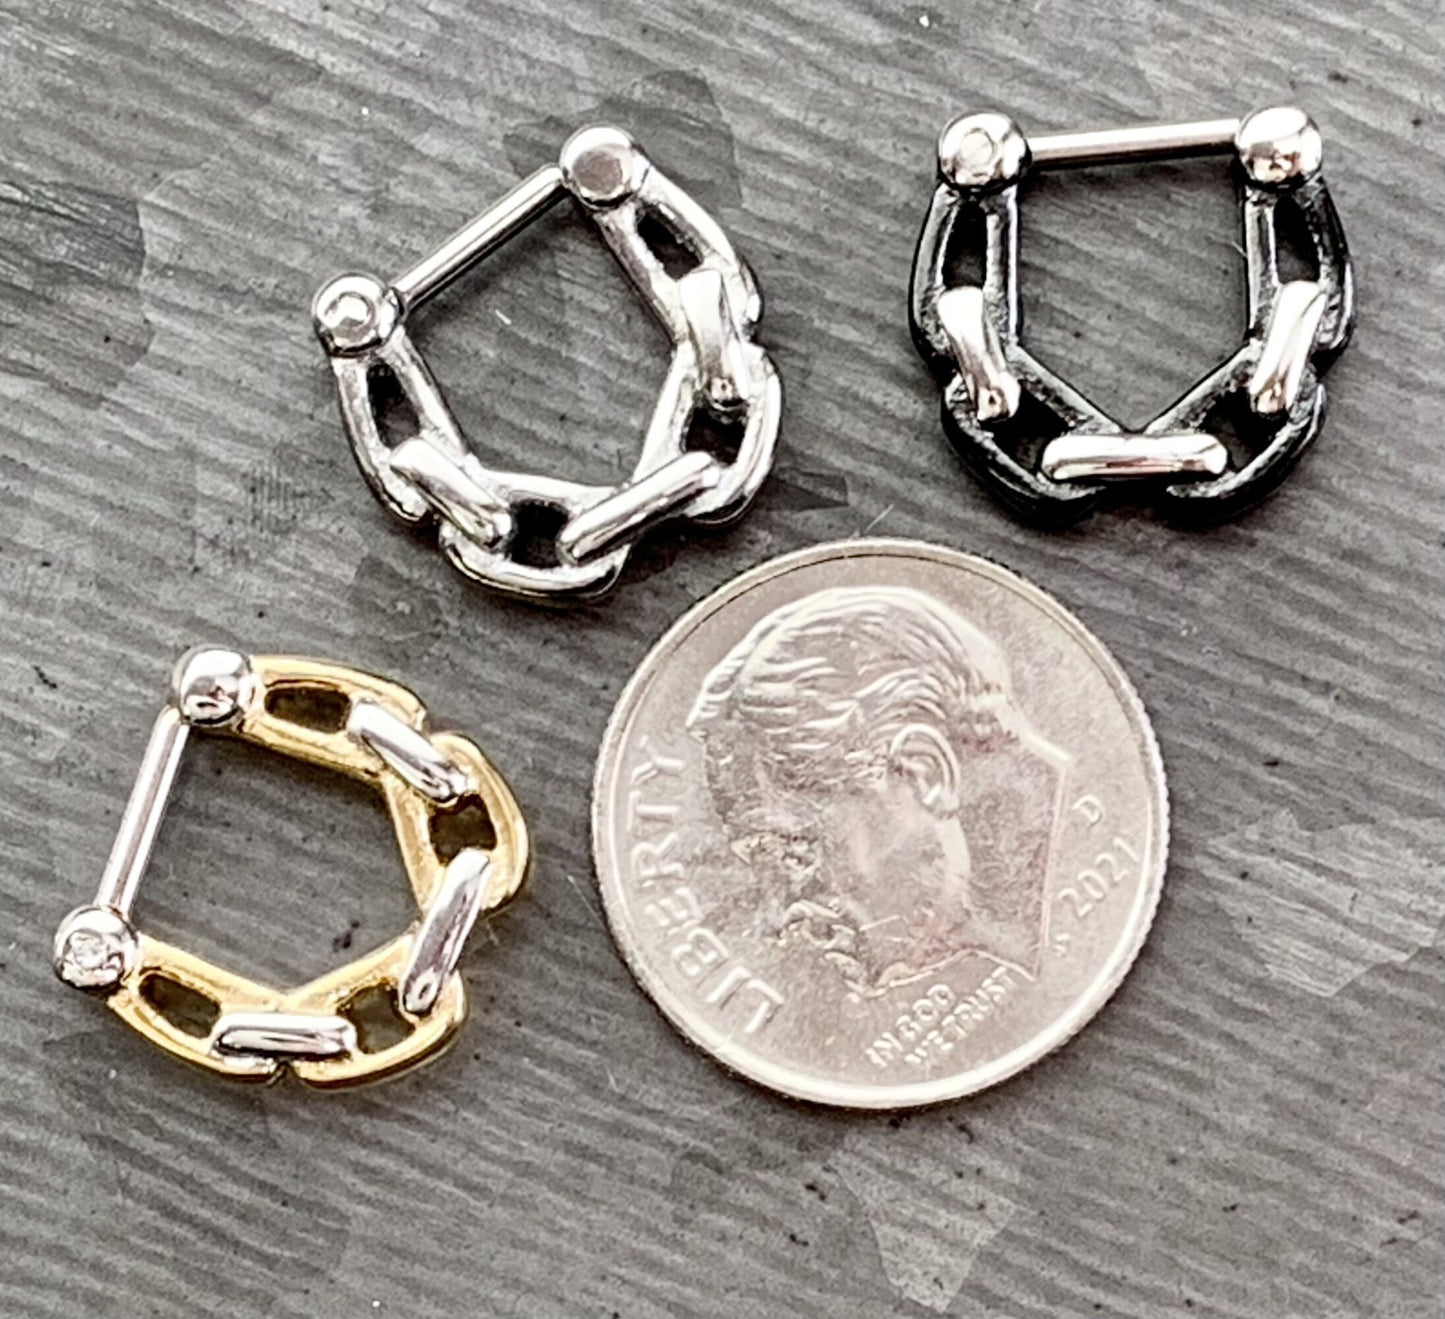 1 Piece Unique Linked Chain 100% Surgical Steel Septum Clicker Nose Ring - 16g or 14g - Steel, Gold and Black Available!